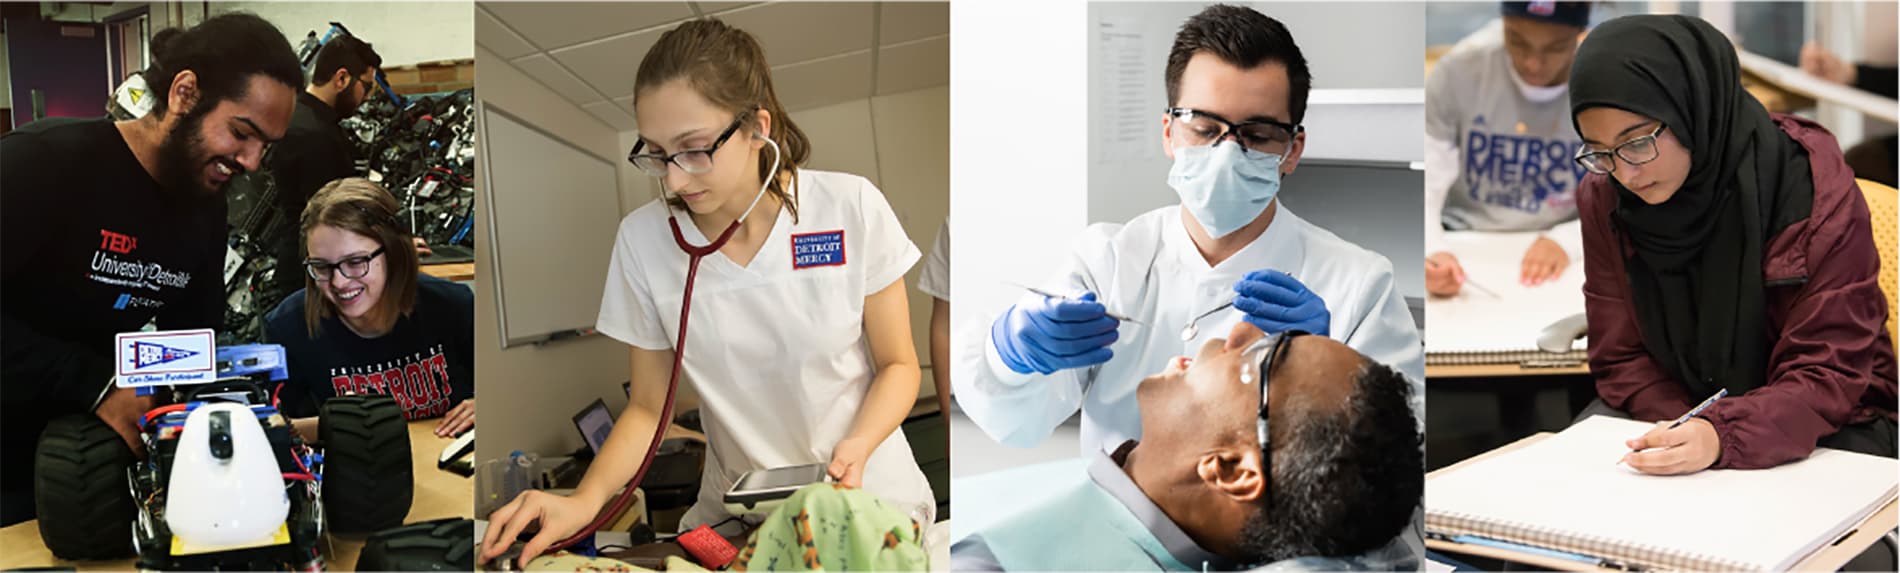 program images of students including engineering and healthprofessions